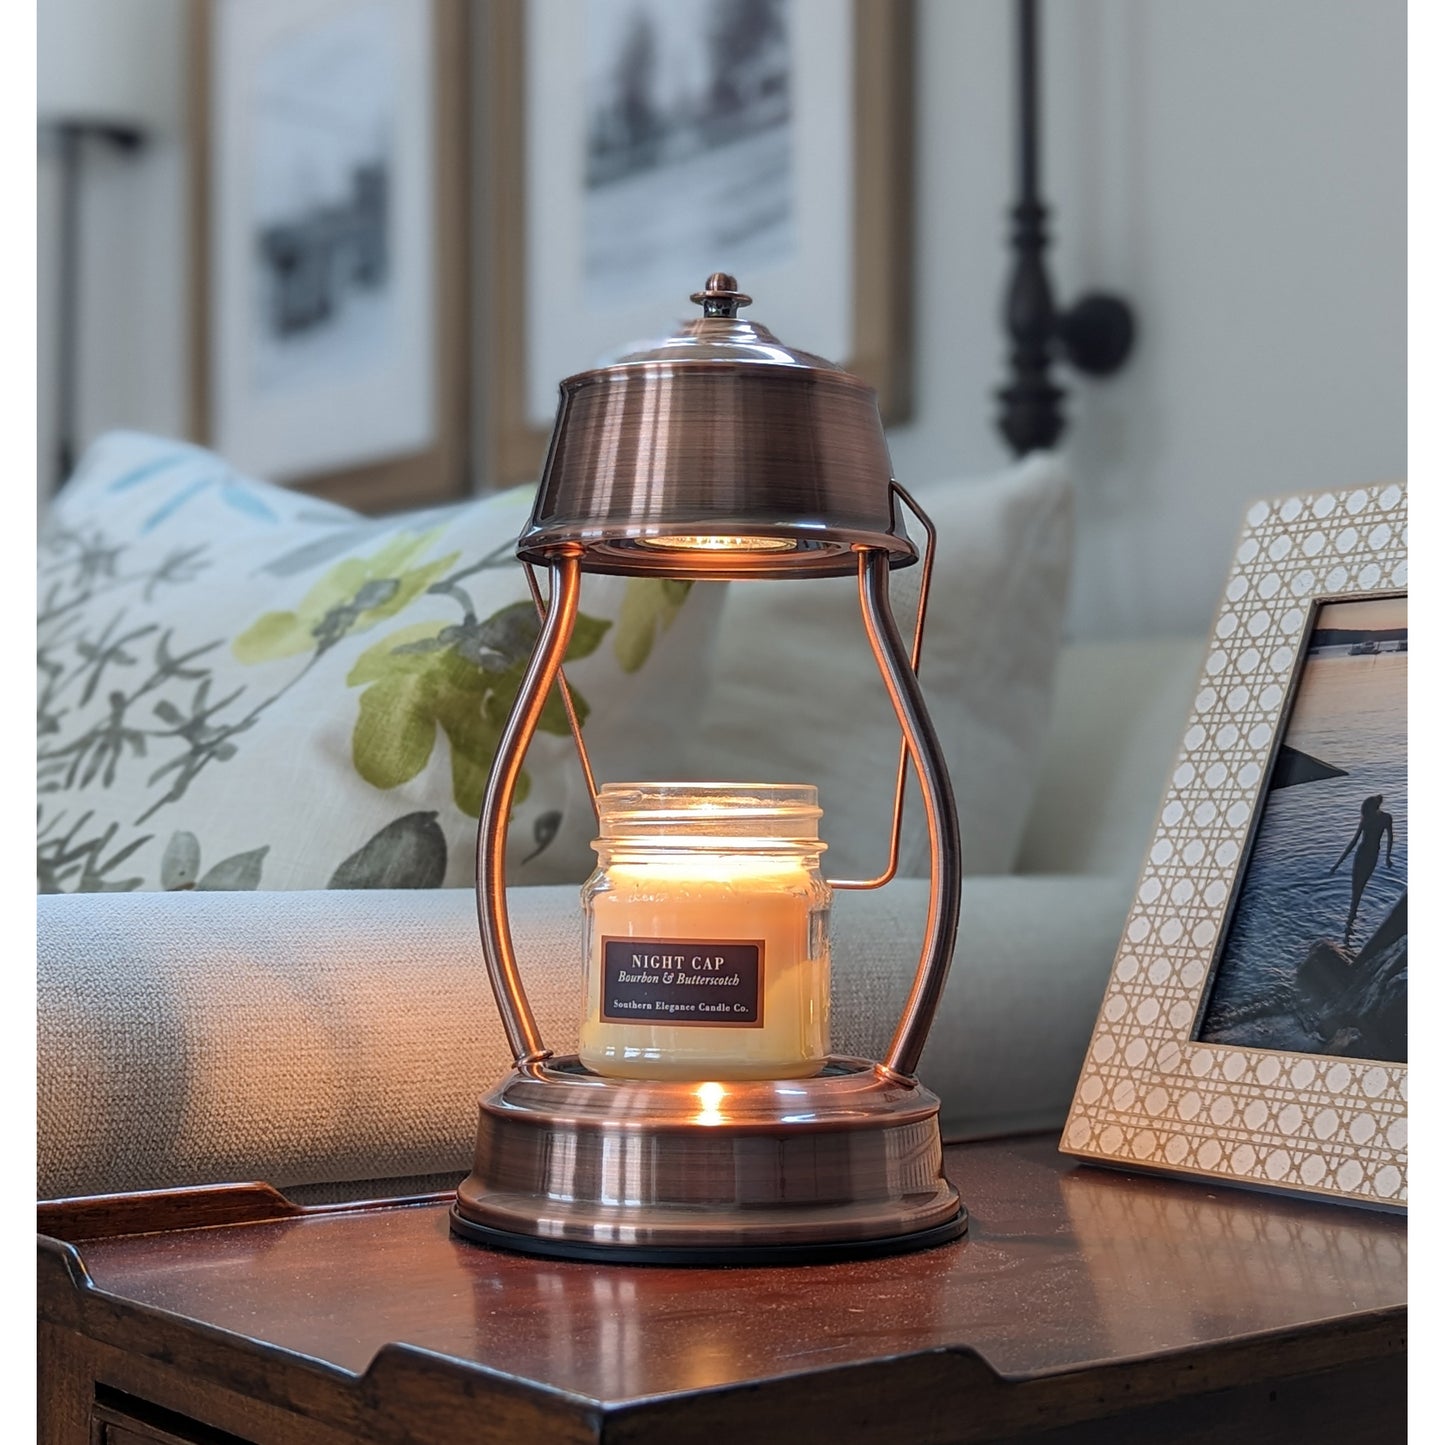 Image, lighted copper candle warmer on coffee table with small scented candle.